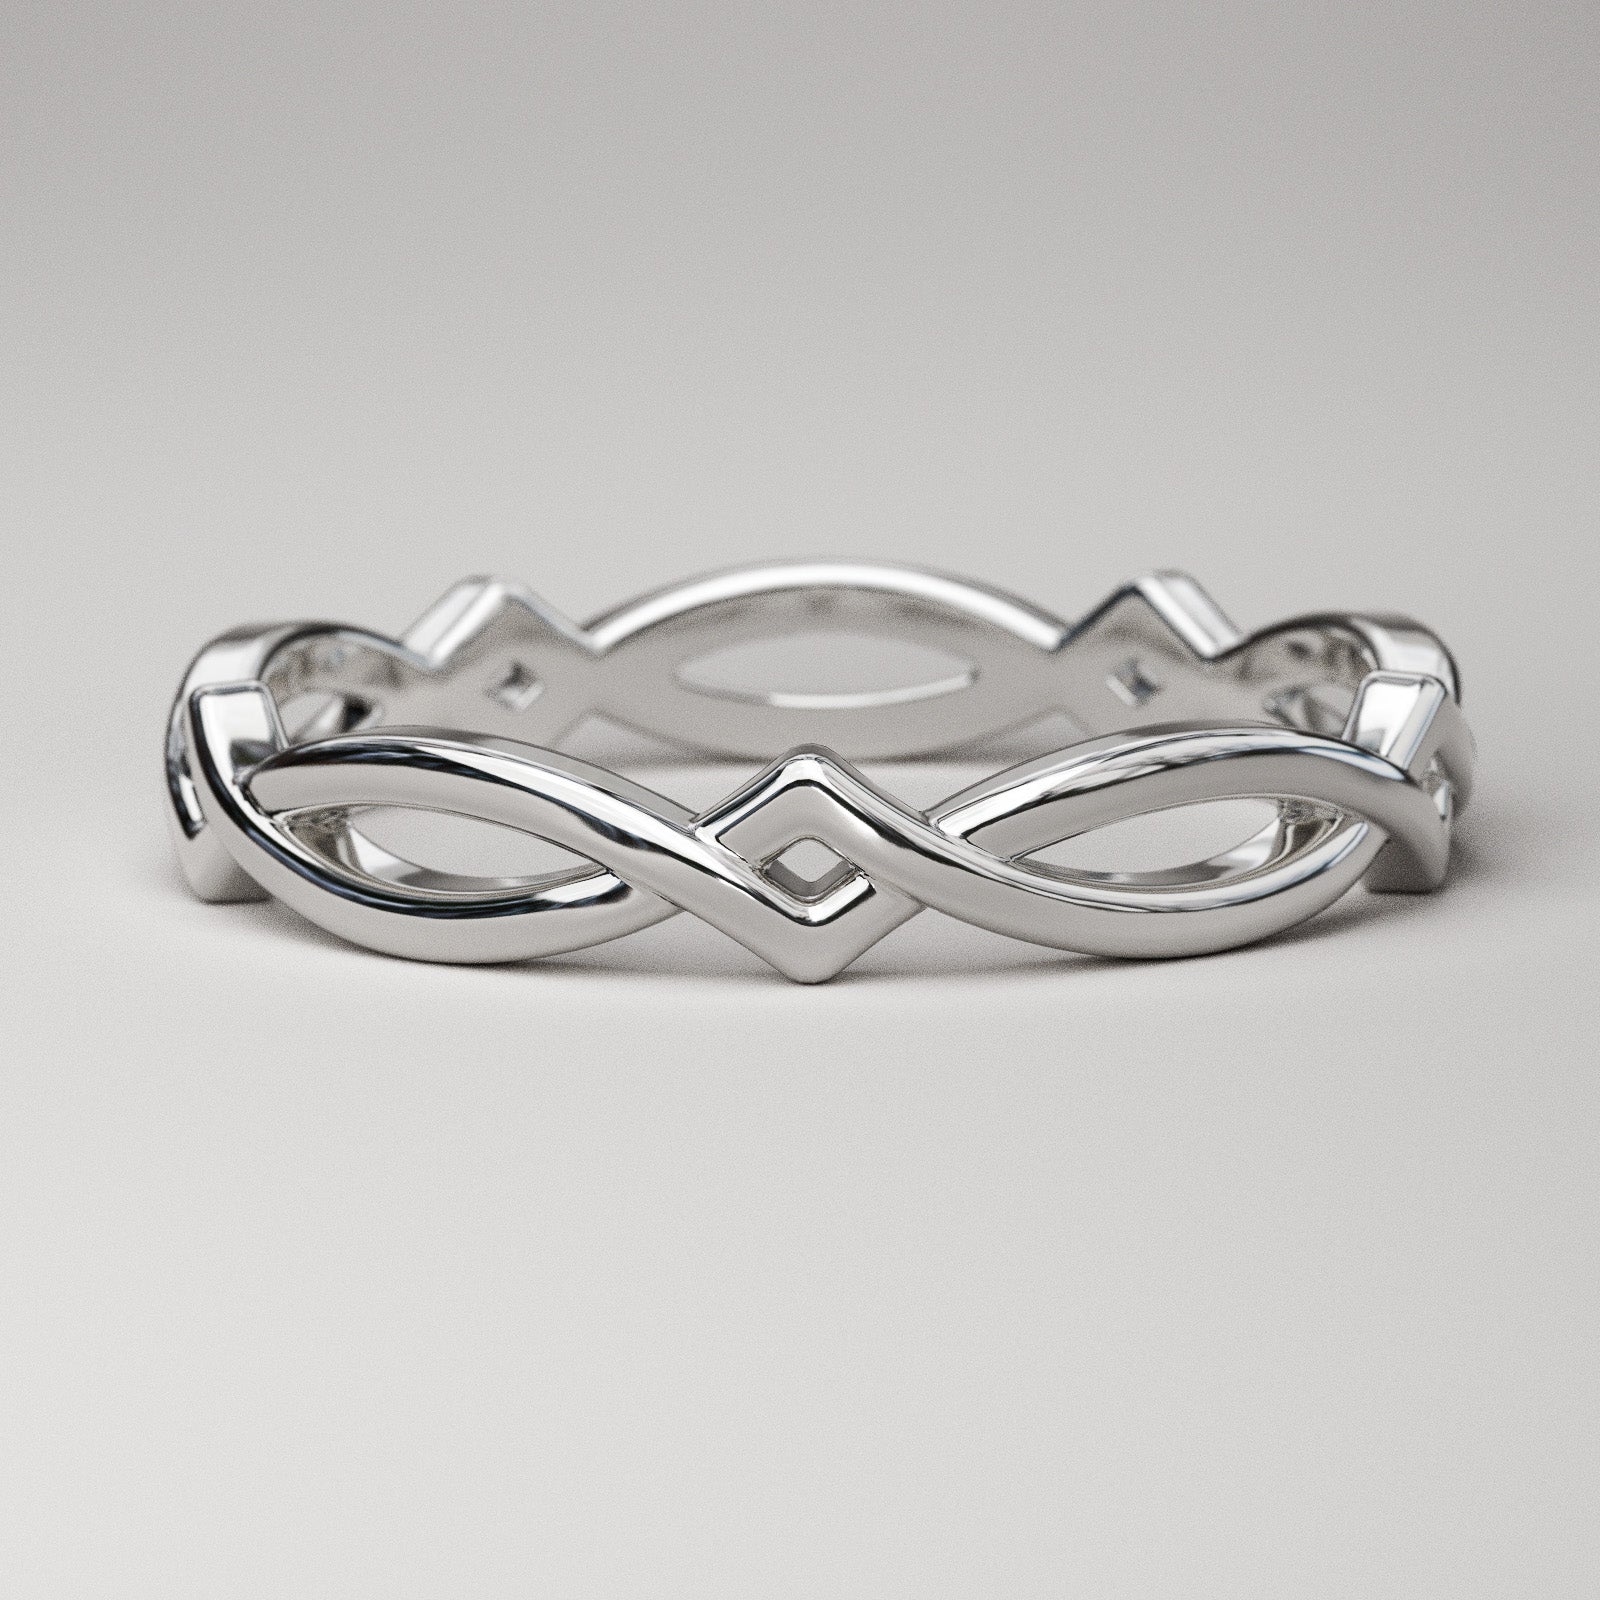 Simple Celtic weave band in solid 14k or 18k white gold by Pete Rhodes